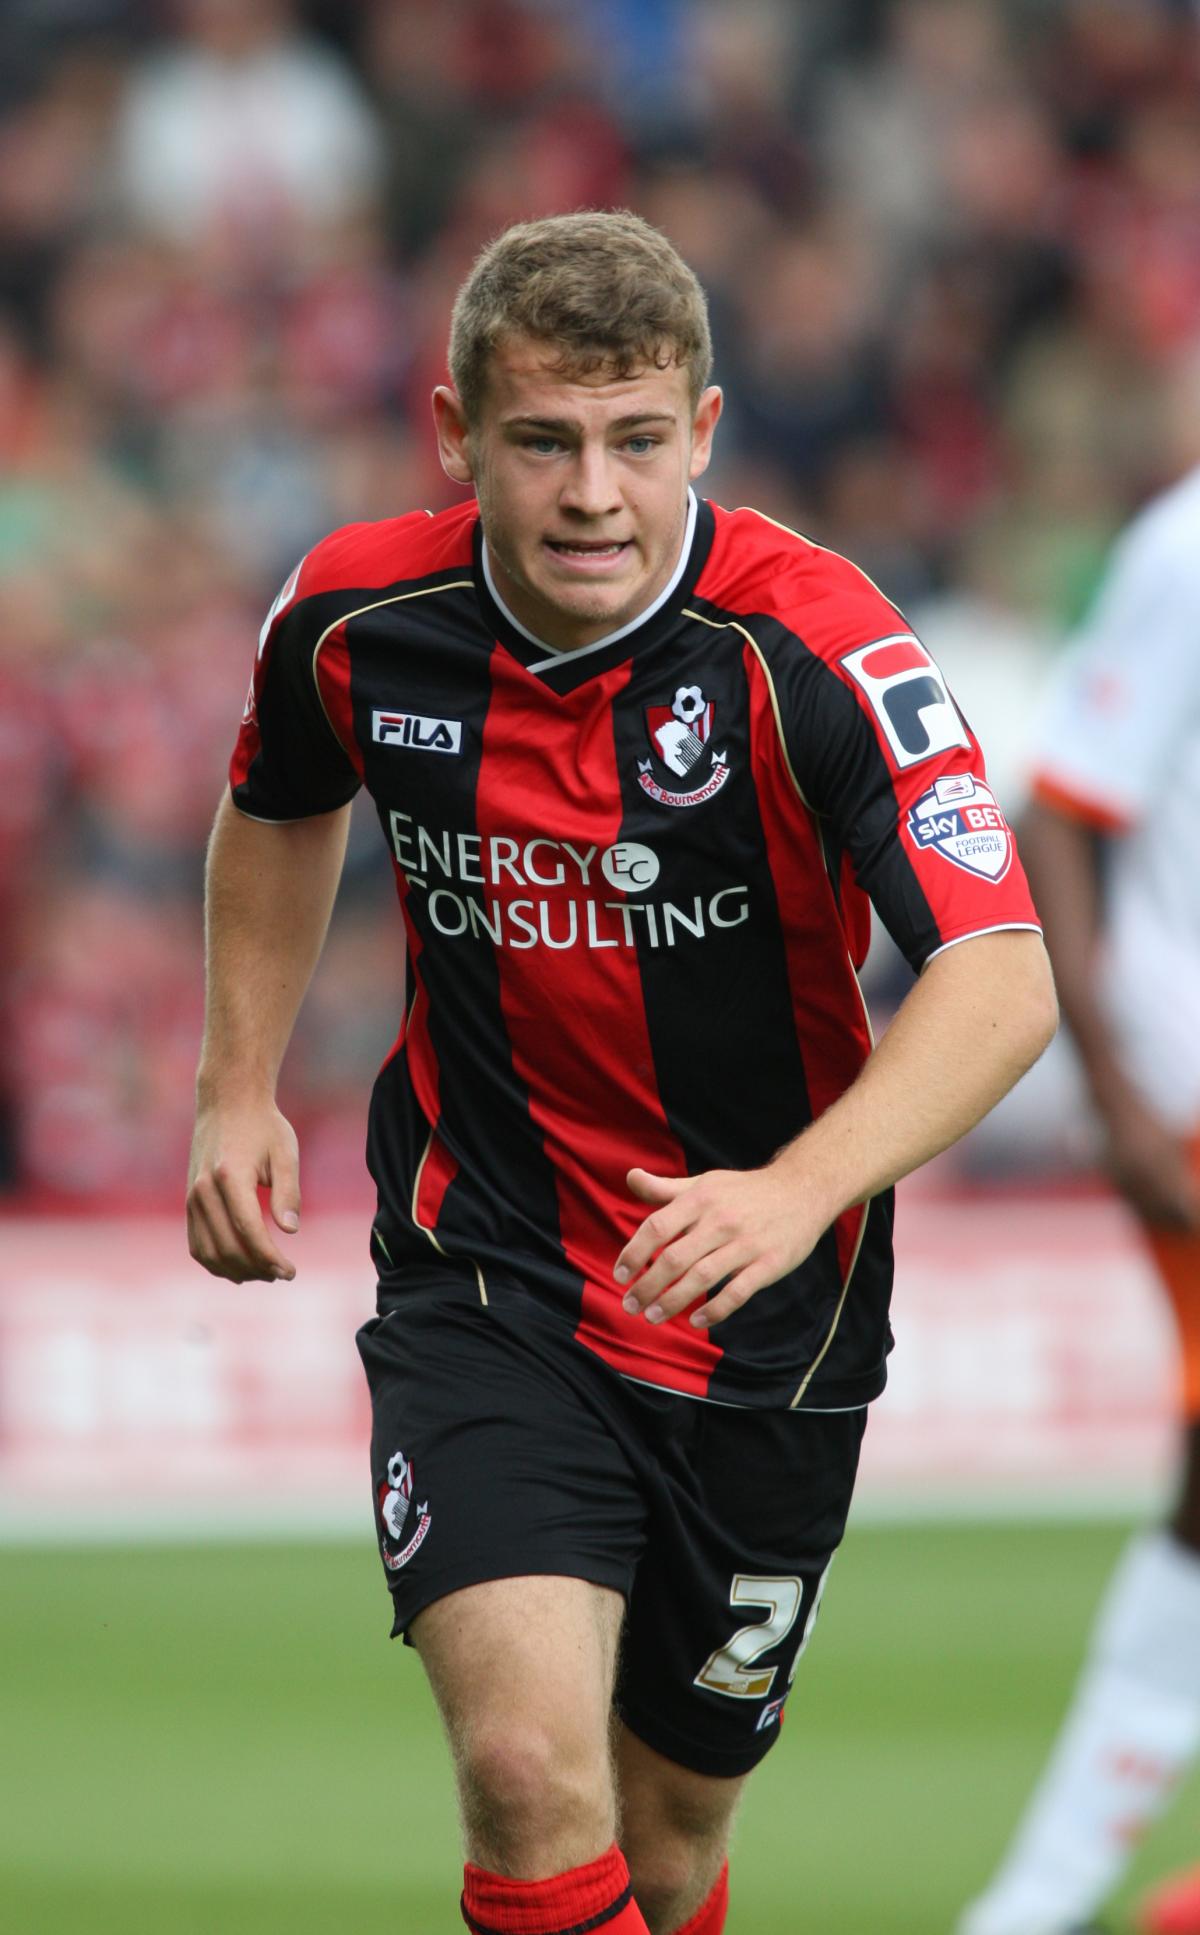 All our pictures from AFC Bournemouth v Blackpool on Saturday, September 14, 2013 at the Goldsands Stadium.